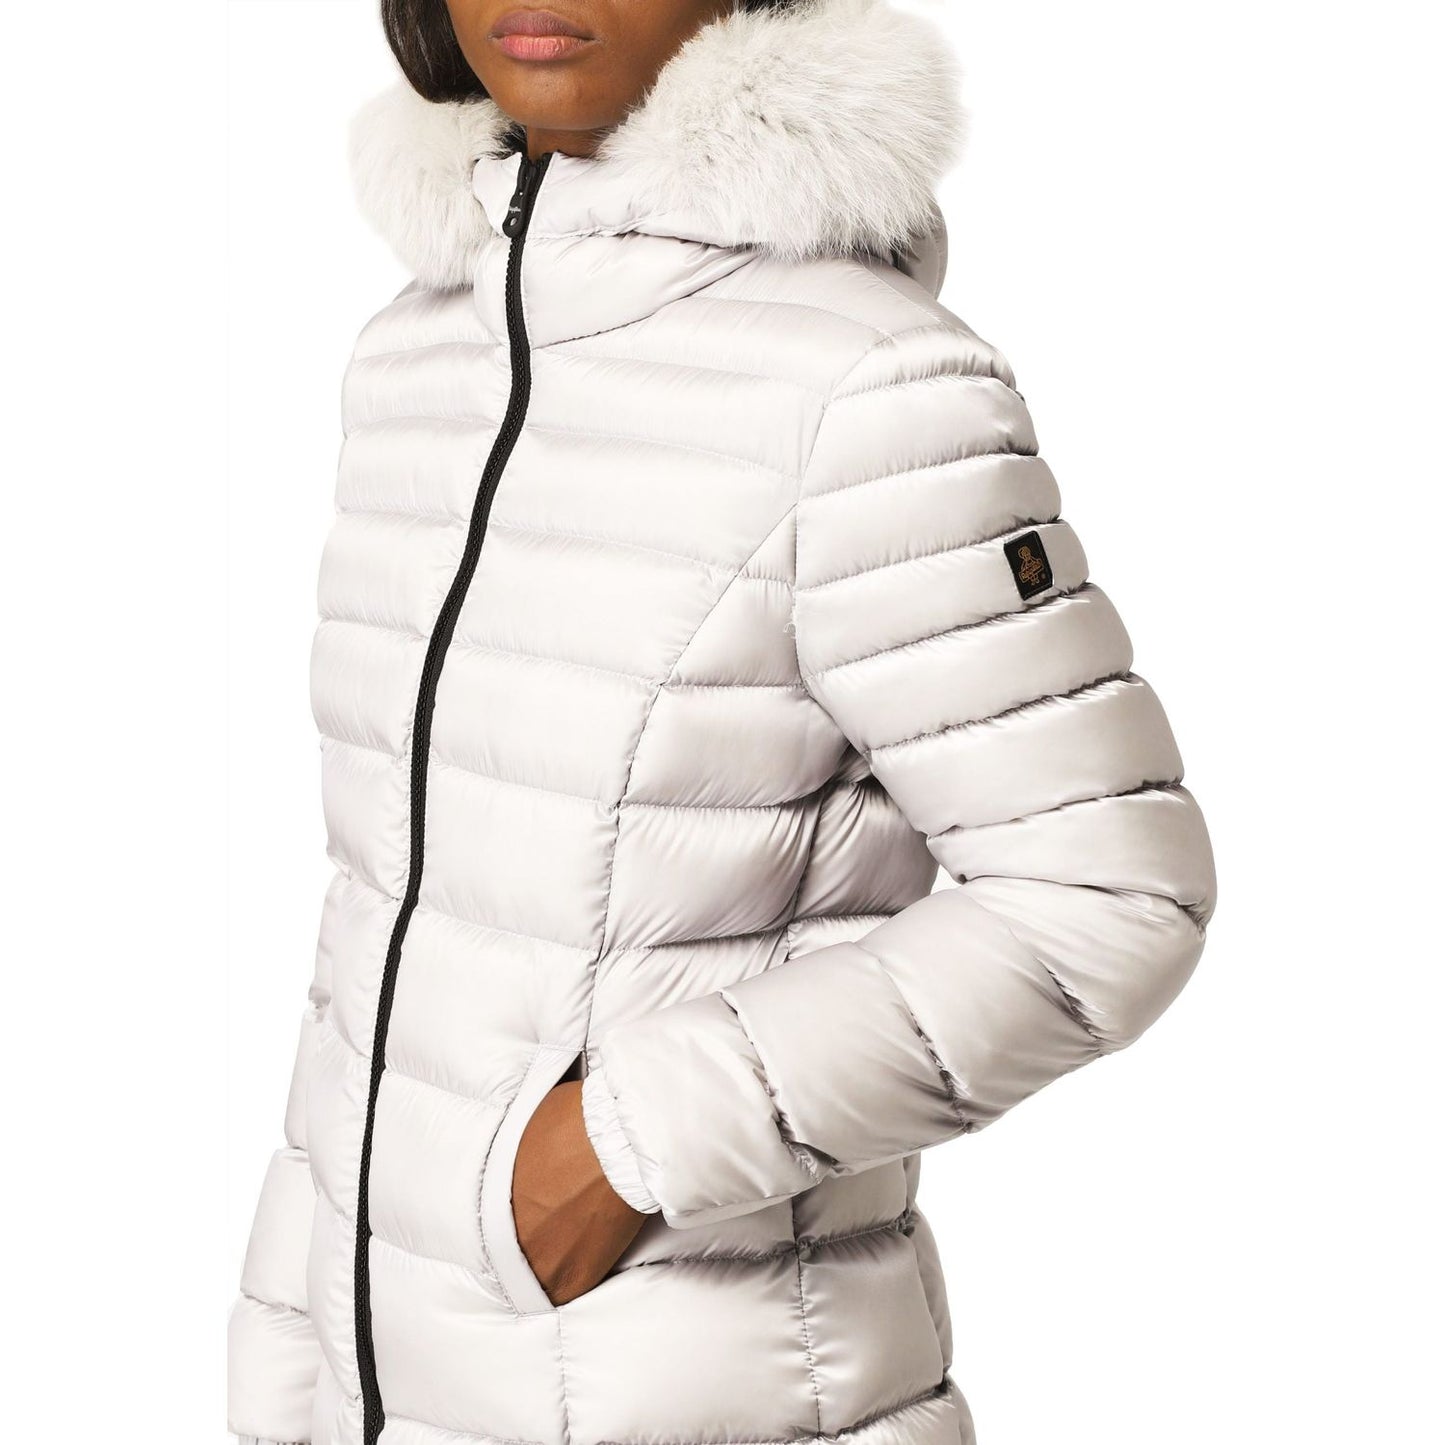 Refrigiwear Chic White Padded Down Jacket with Fur Hood chic-white-padded-down-jacket-with-fur-hood